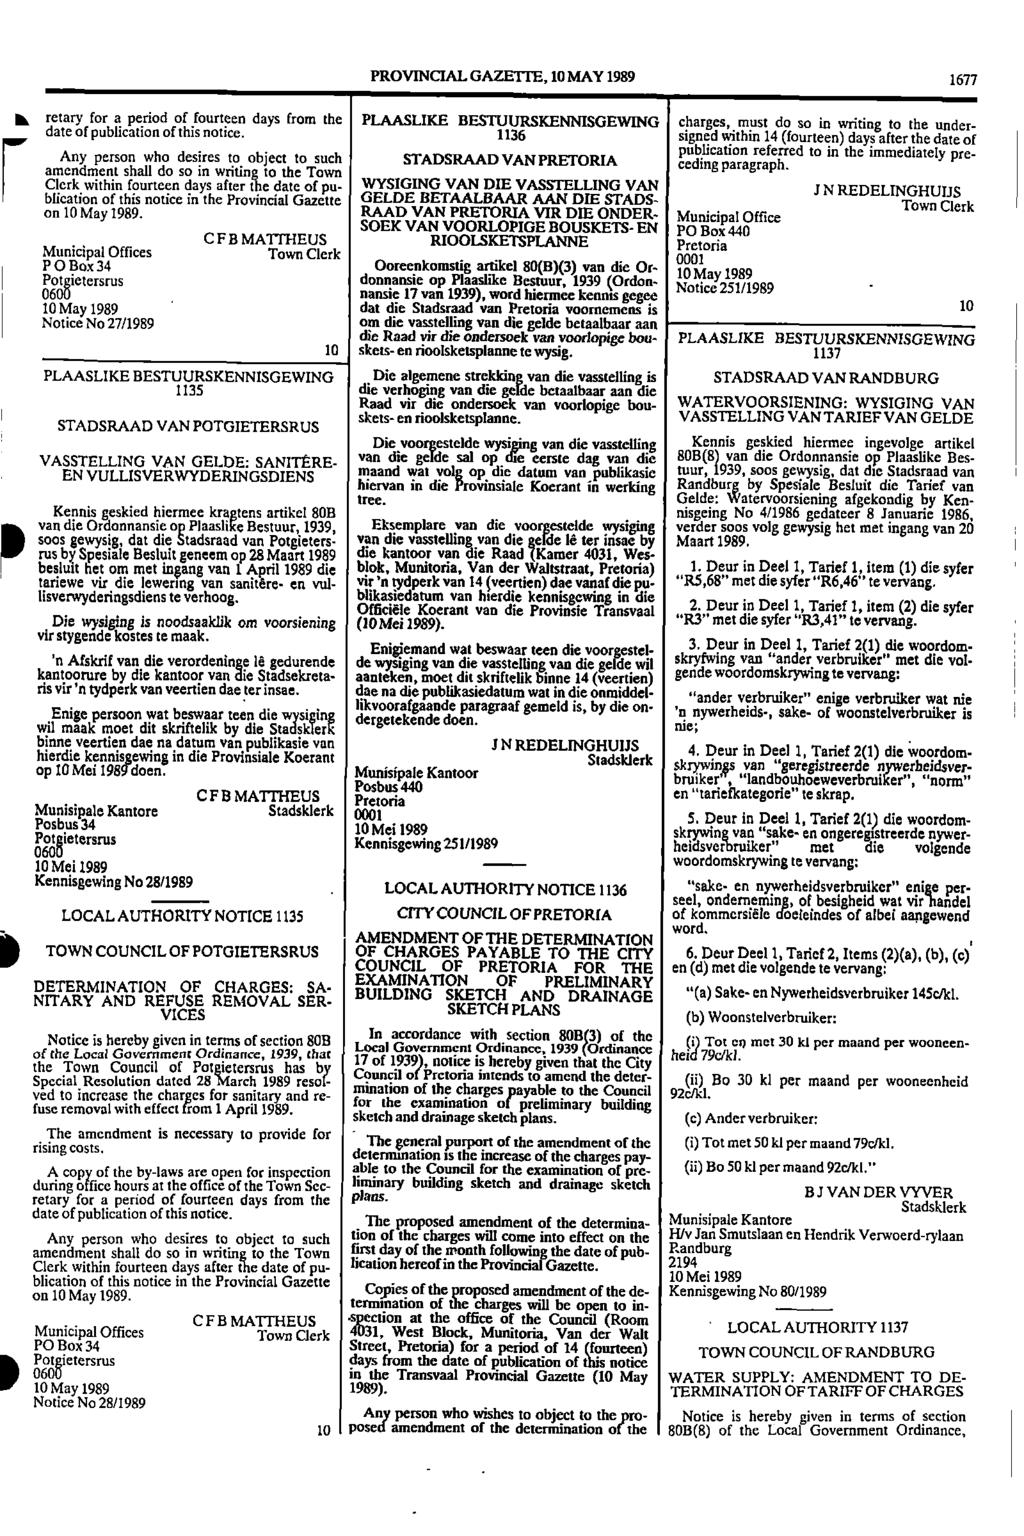 PROVINCIAL GAZETTE, 10 MAY 1989 1677 lk retary for a period of fourteen days from the PLAASLIKE BESTUURSICENNISGEWING charges, must do so in writing to the date under of publication of this notice.